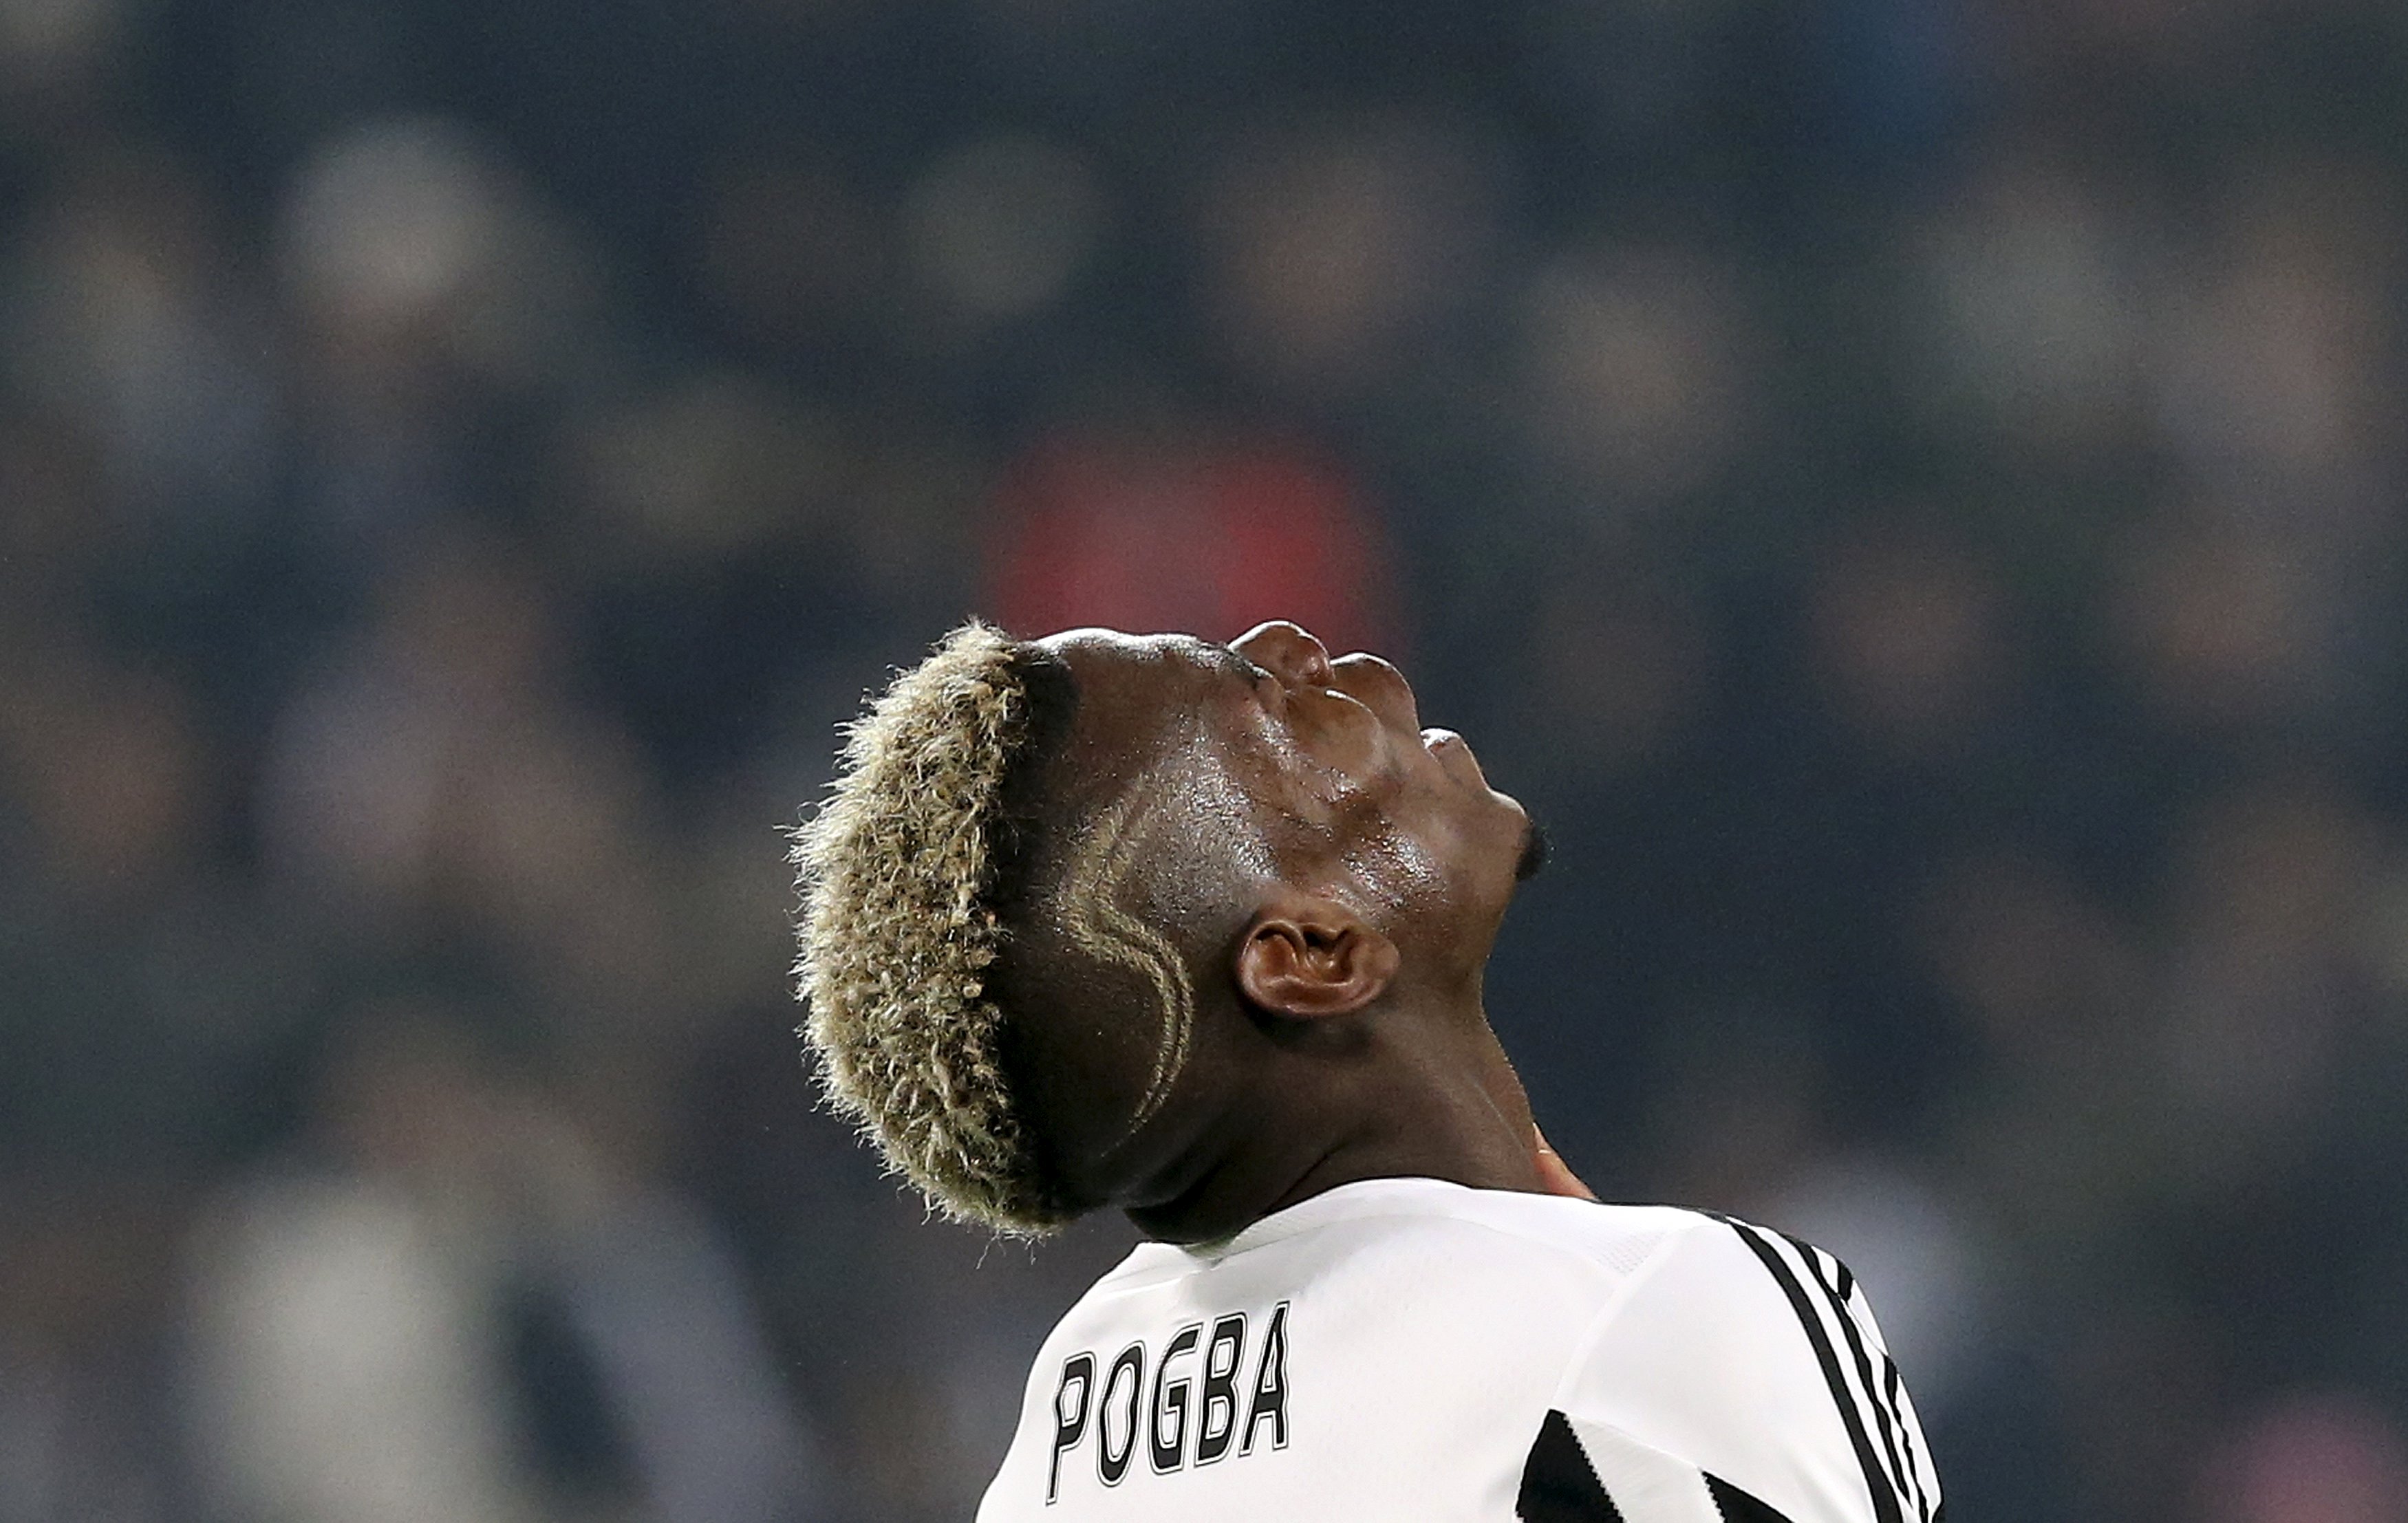 Juventus' Paul Pogba reacts during the match against Bayern Munich. REUTERS/Stefano Rellandini